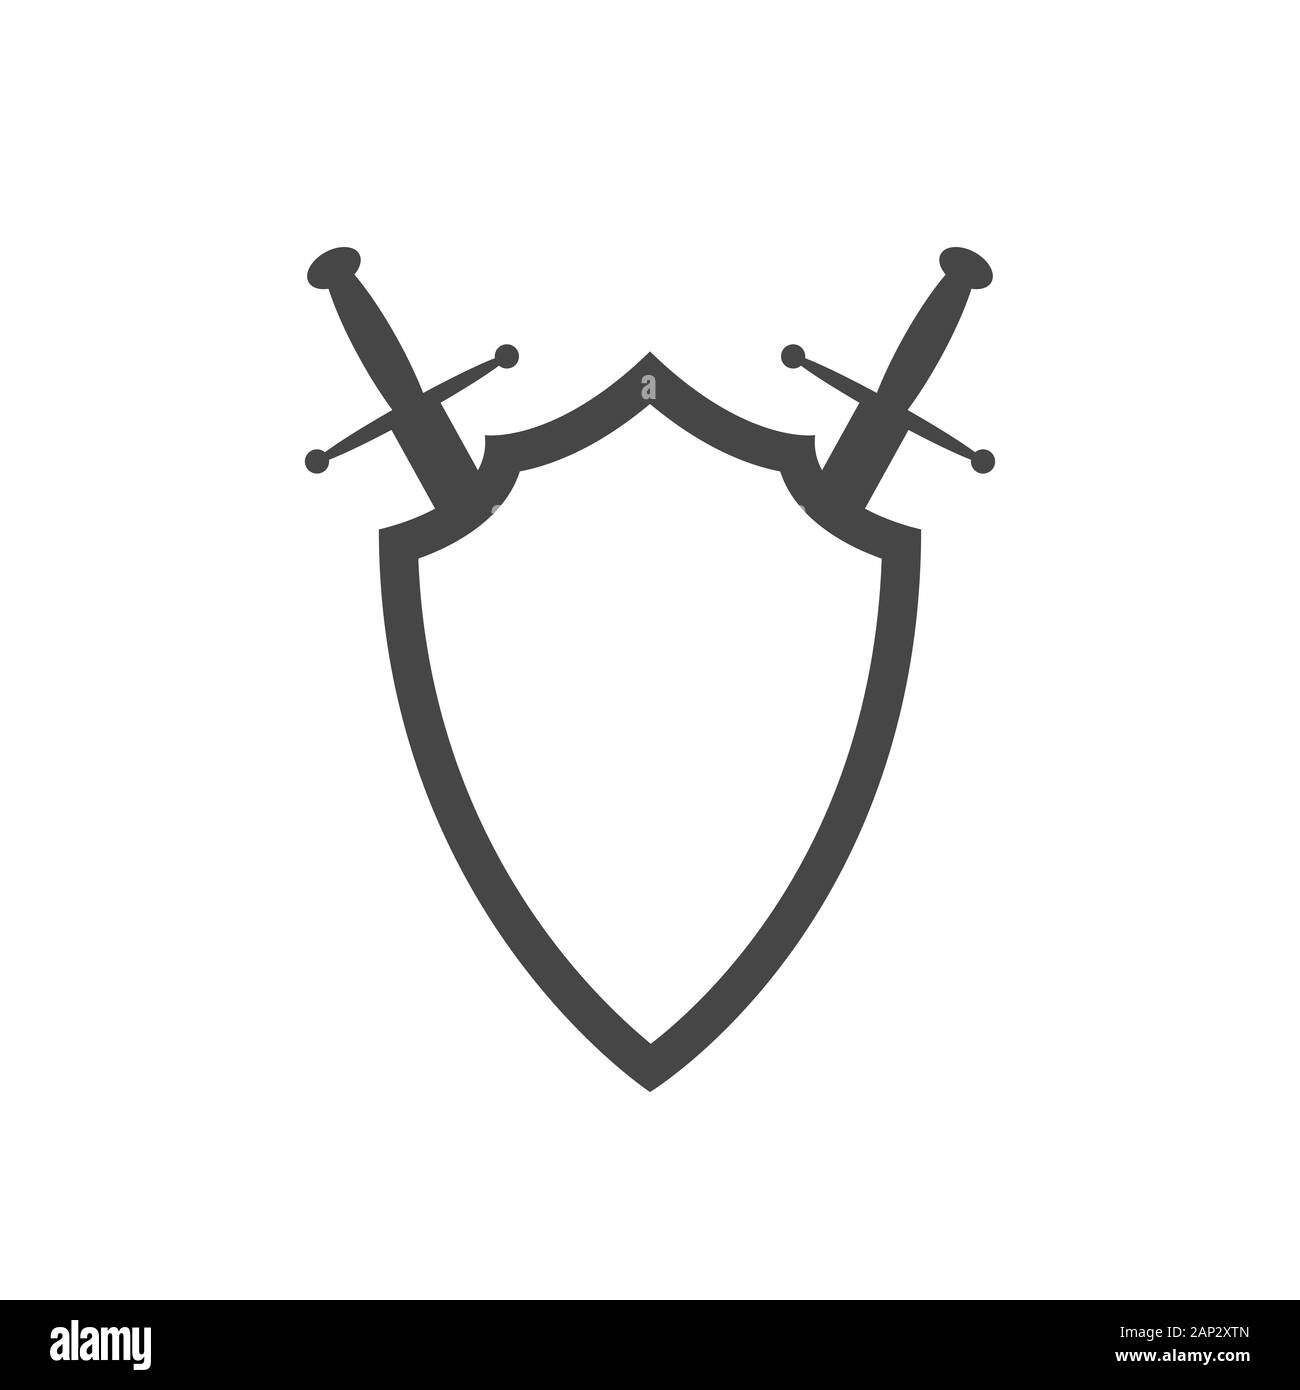 Swords Icon Stock Photos and Images - 123RF